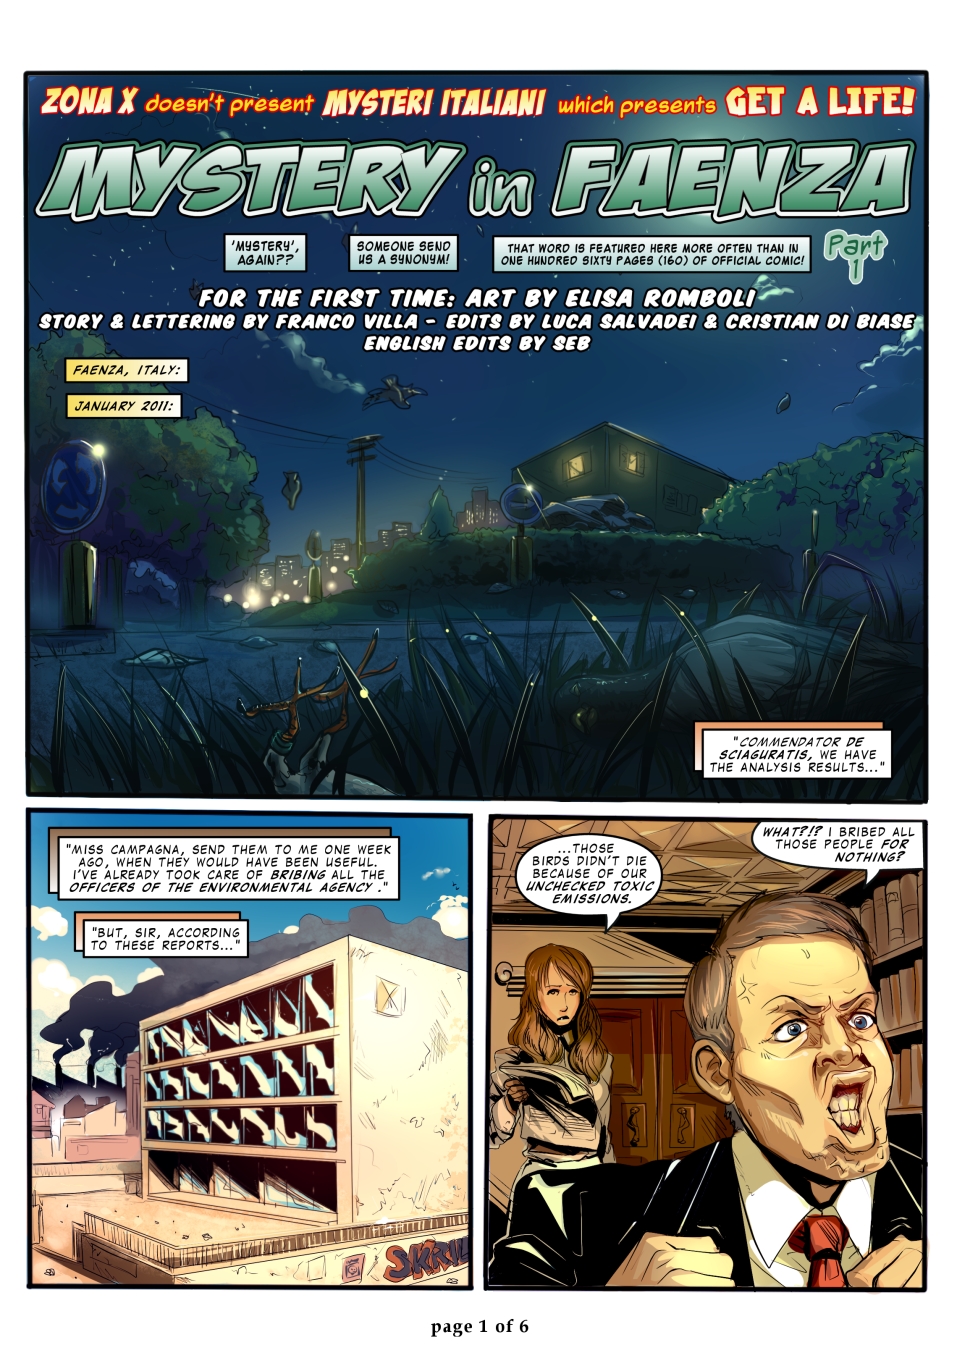 GaL Mistery in Faenza (Part 01 - pg 01)